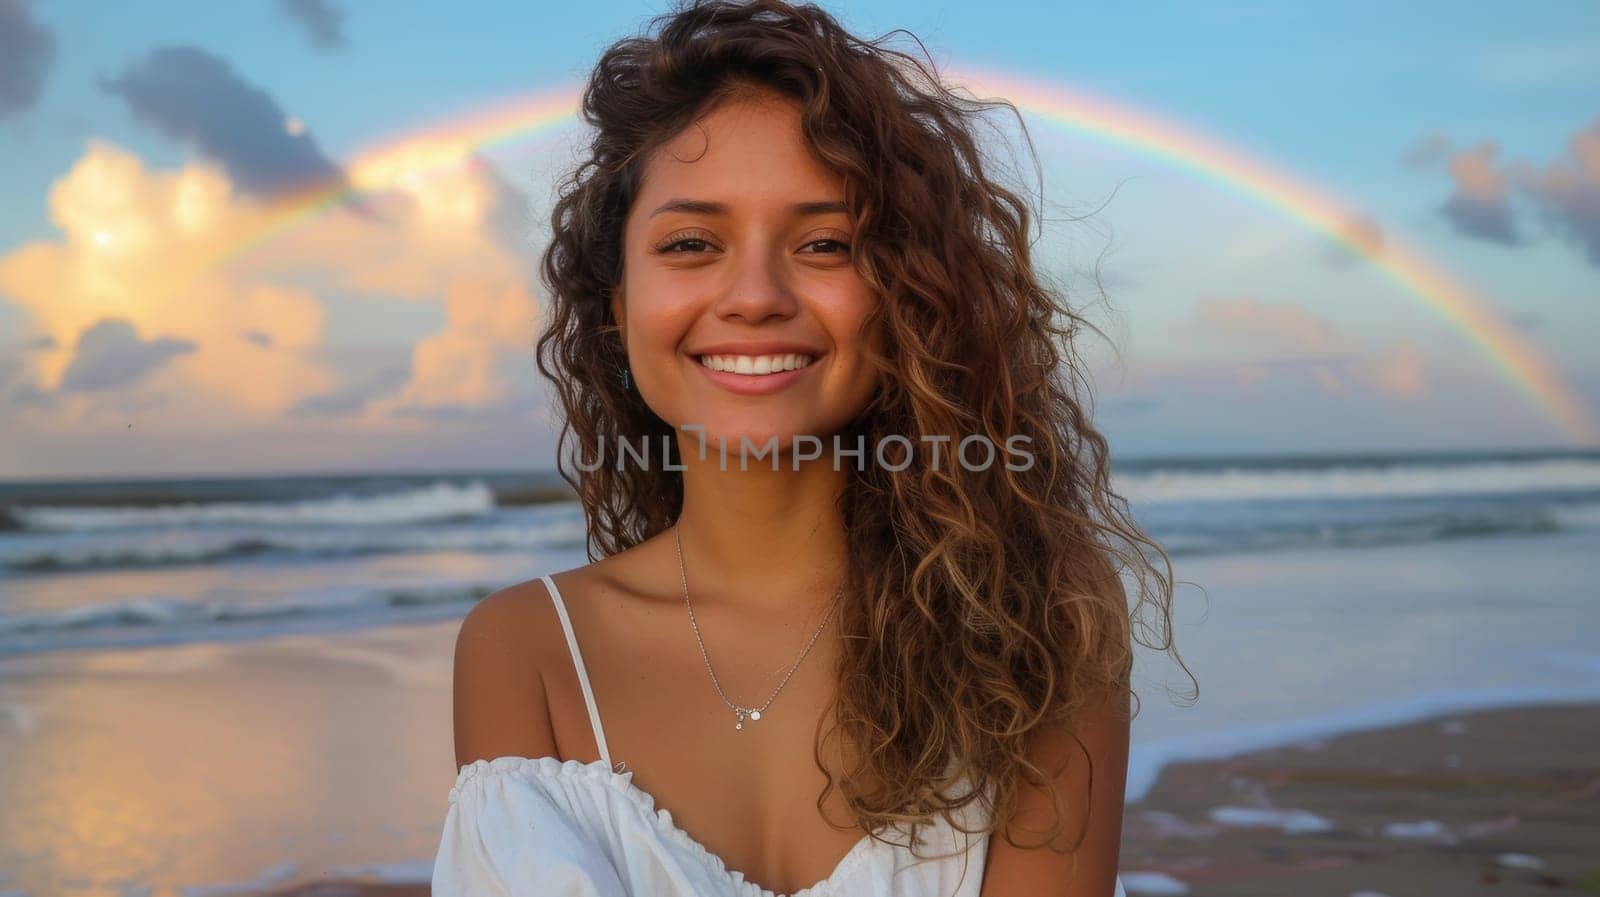 A woman smiling at the camera in front of a rainbow